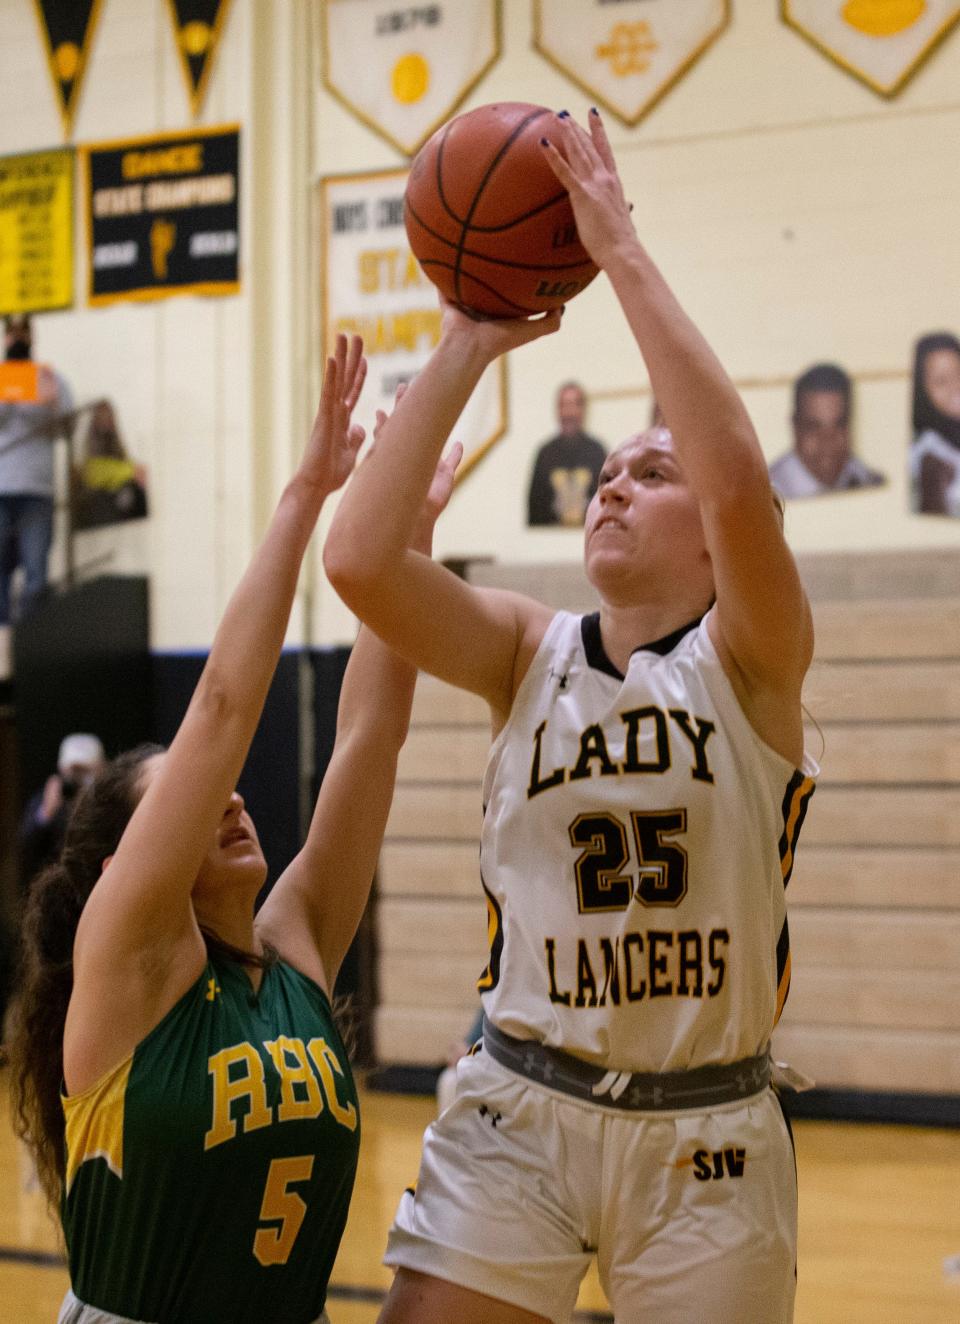 SJV's Katie Hill goes up with shot as RBC Antonia Panayides tries to block her. St John Vianney Girls Basketball smother Red Bank Catholic 61-34 in Championship final in Holmdel, NJ on March 6, 2021.